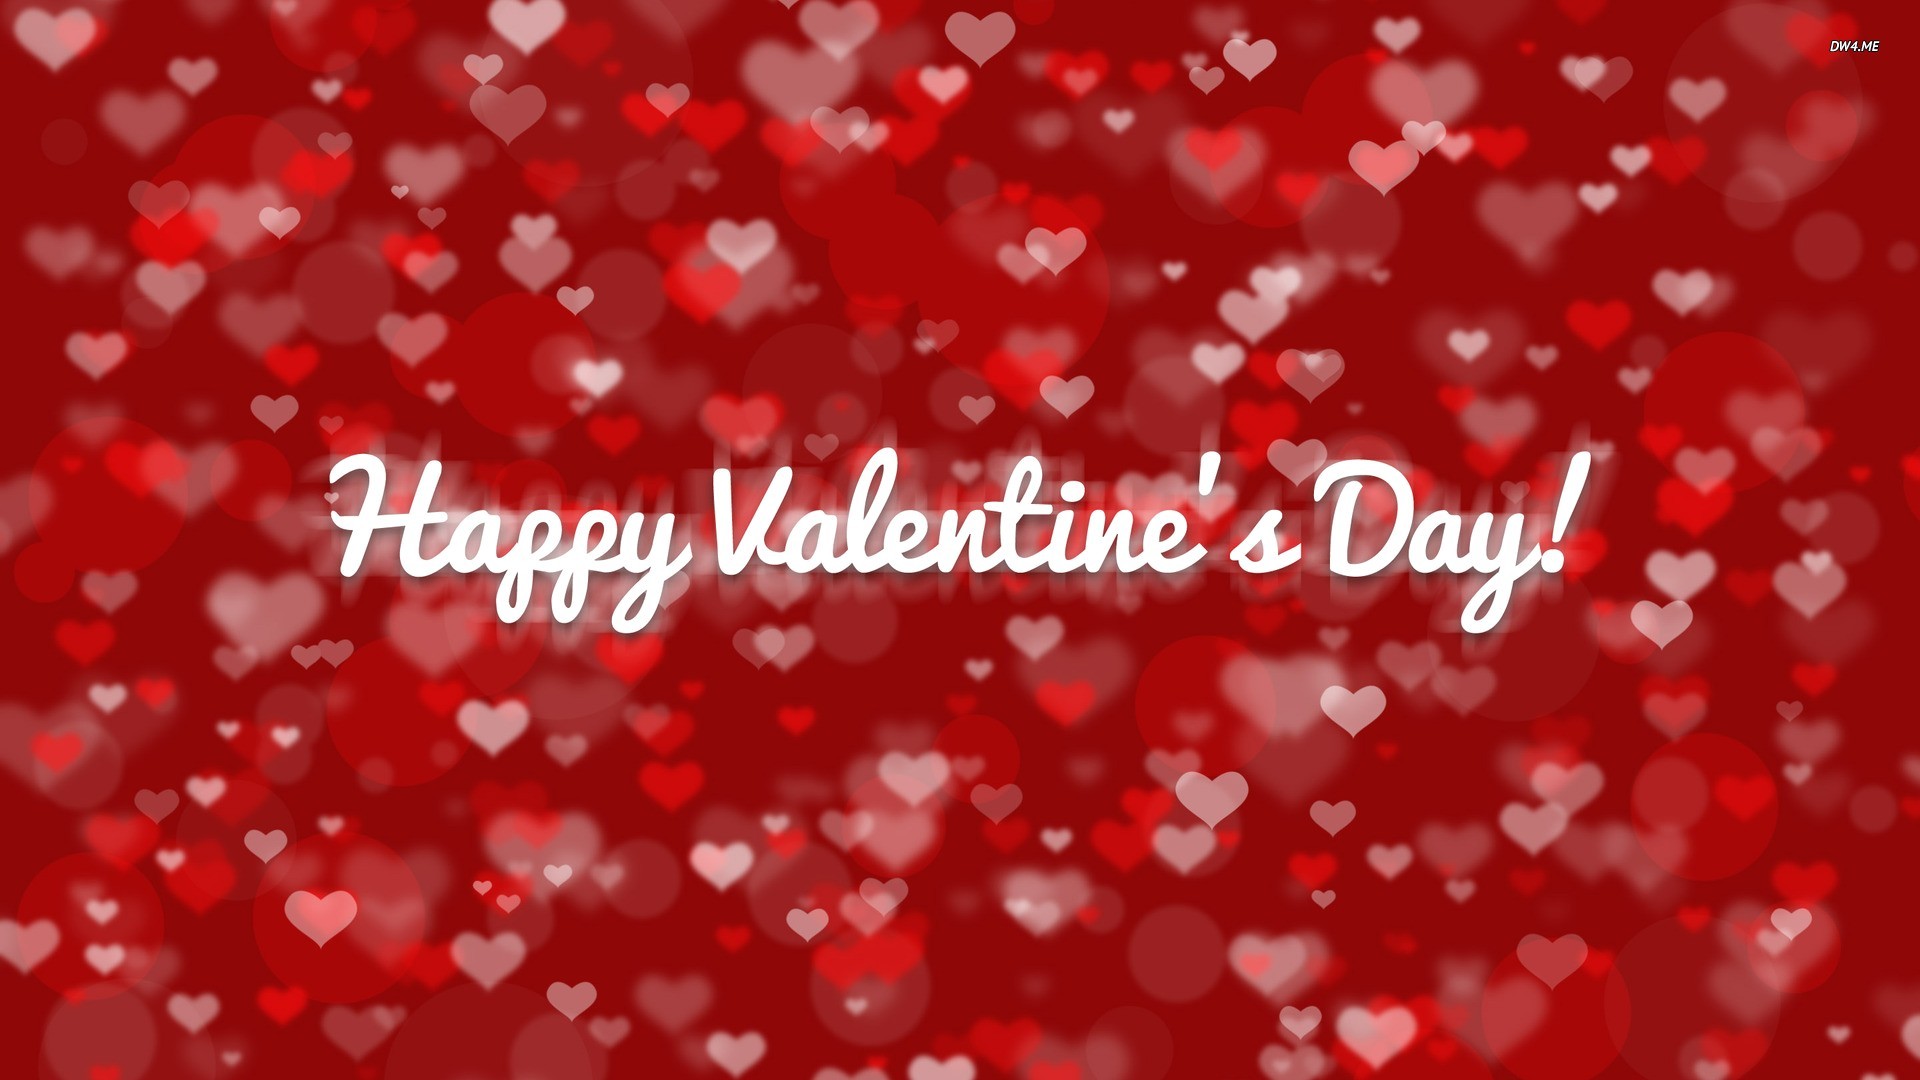 2099 Happy Valentines Day 1920x1080 Holiday Wallpaper Desktop Backgrounds 1920x1080